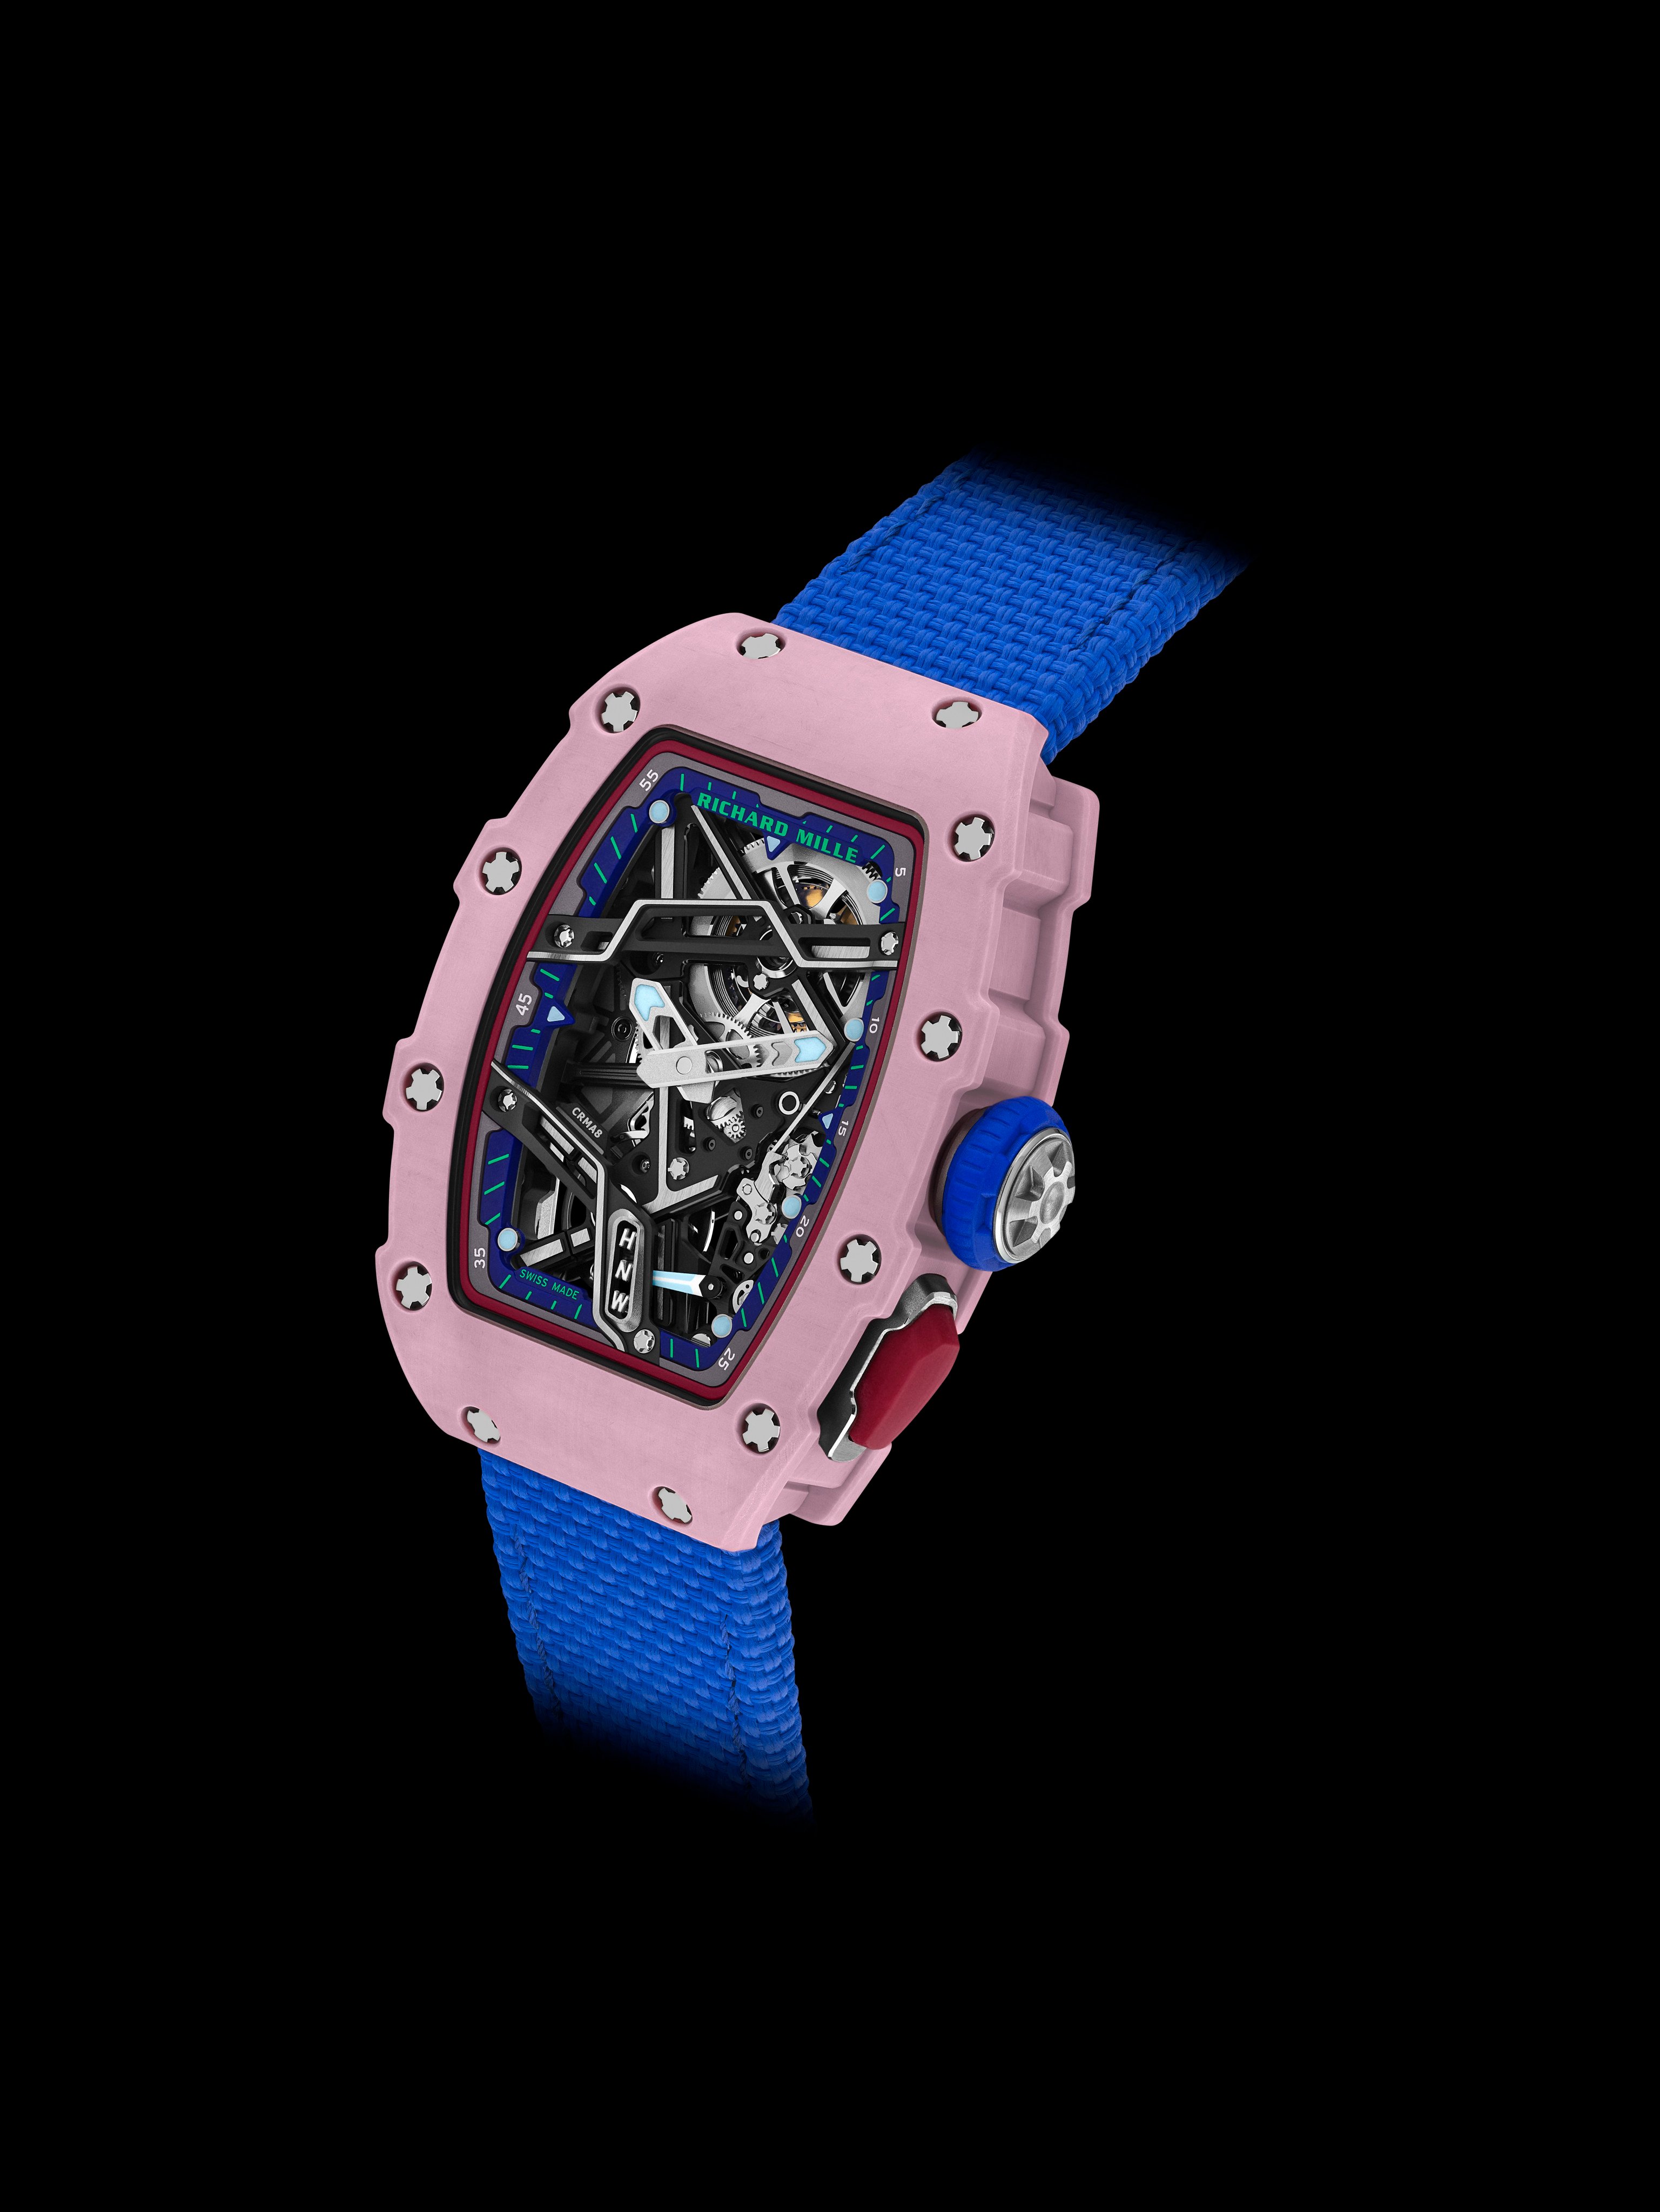 The RM 07-04 timepiece in mauve. Photo: Richard Mille